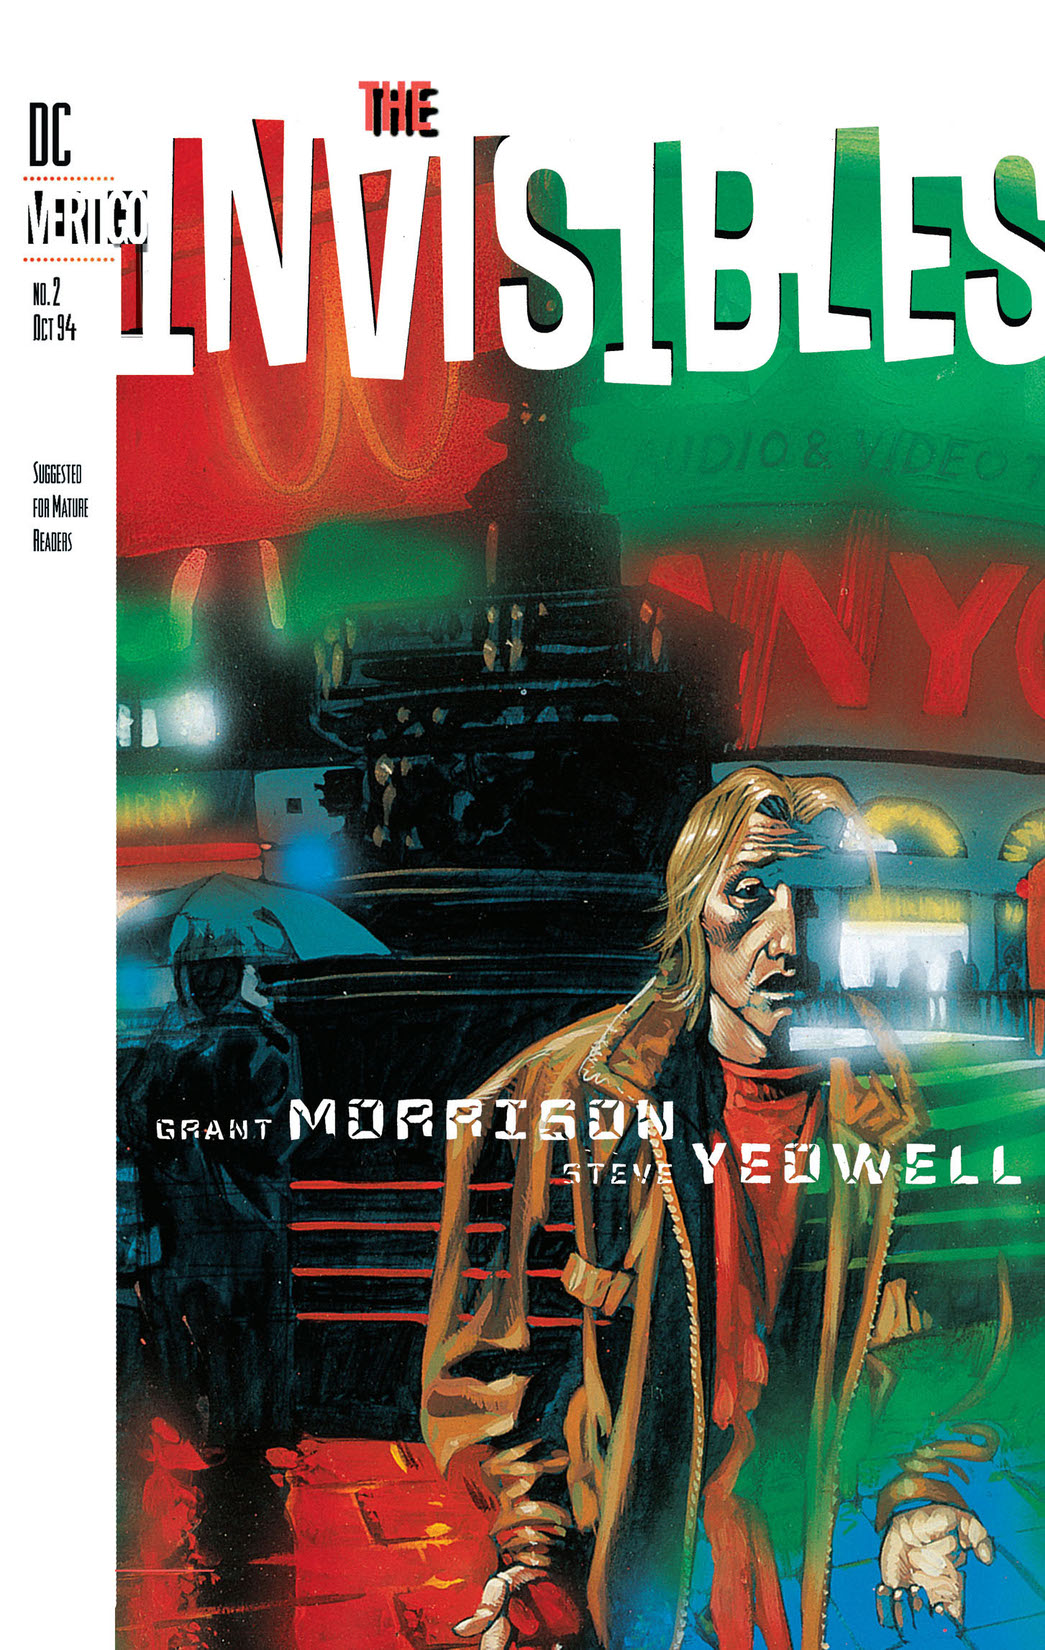 The Invisibles #2 preview images